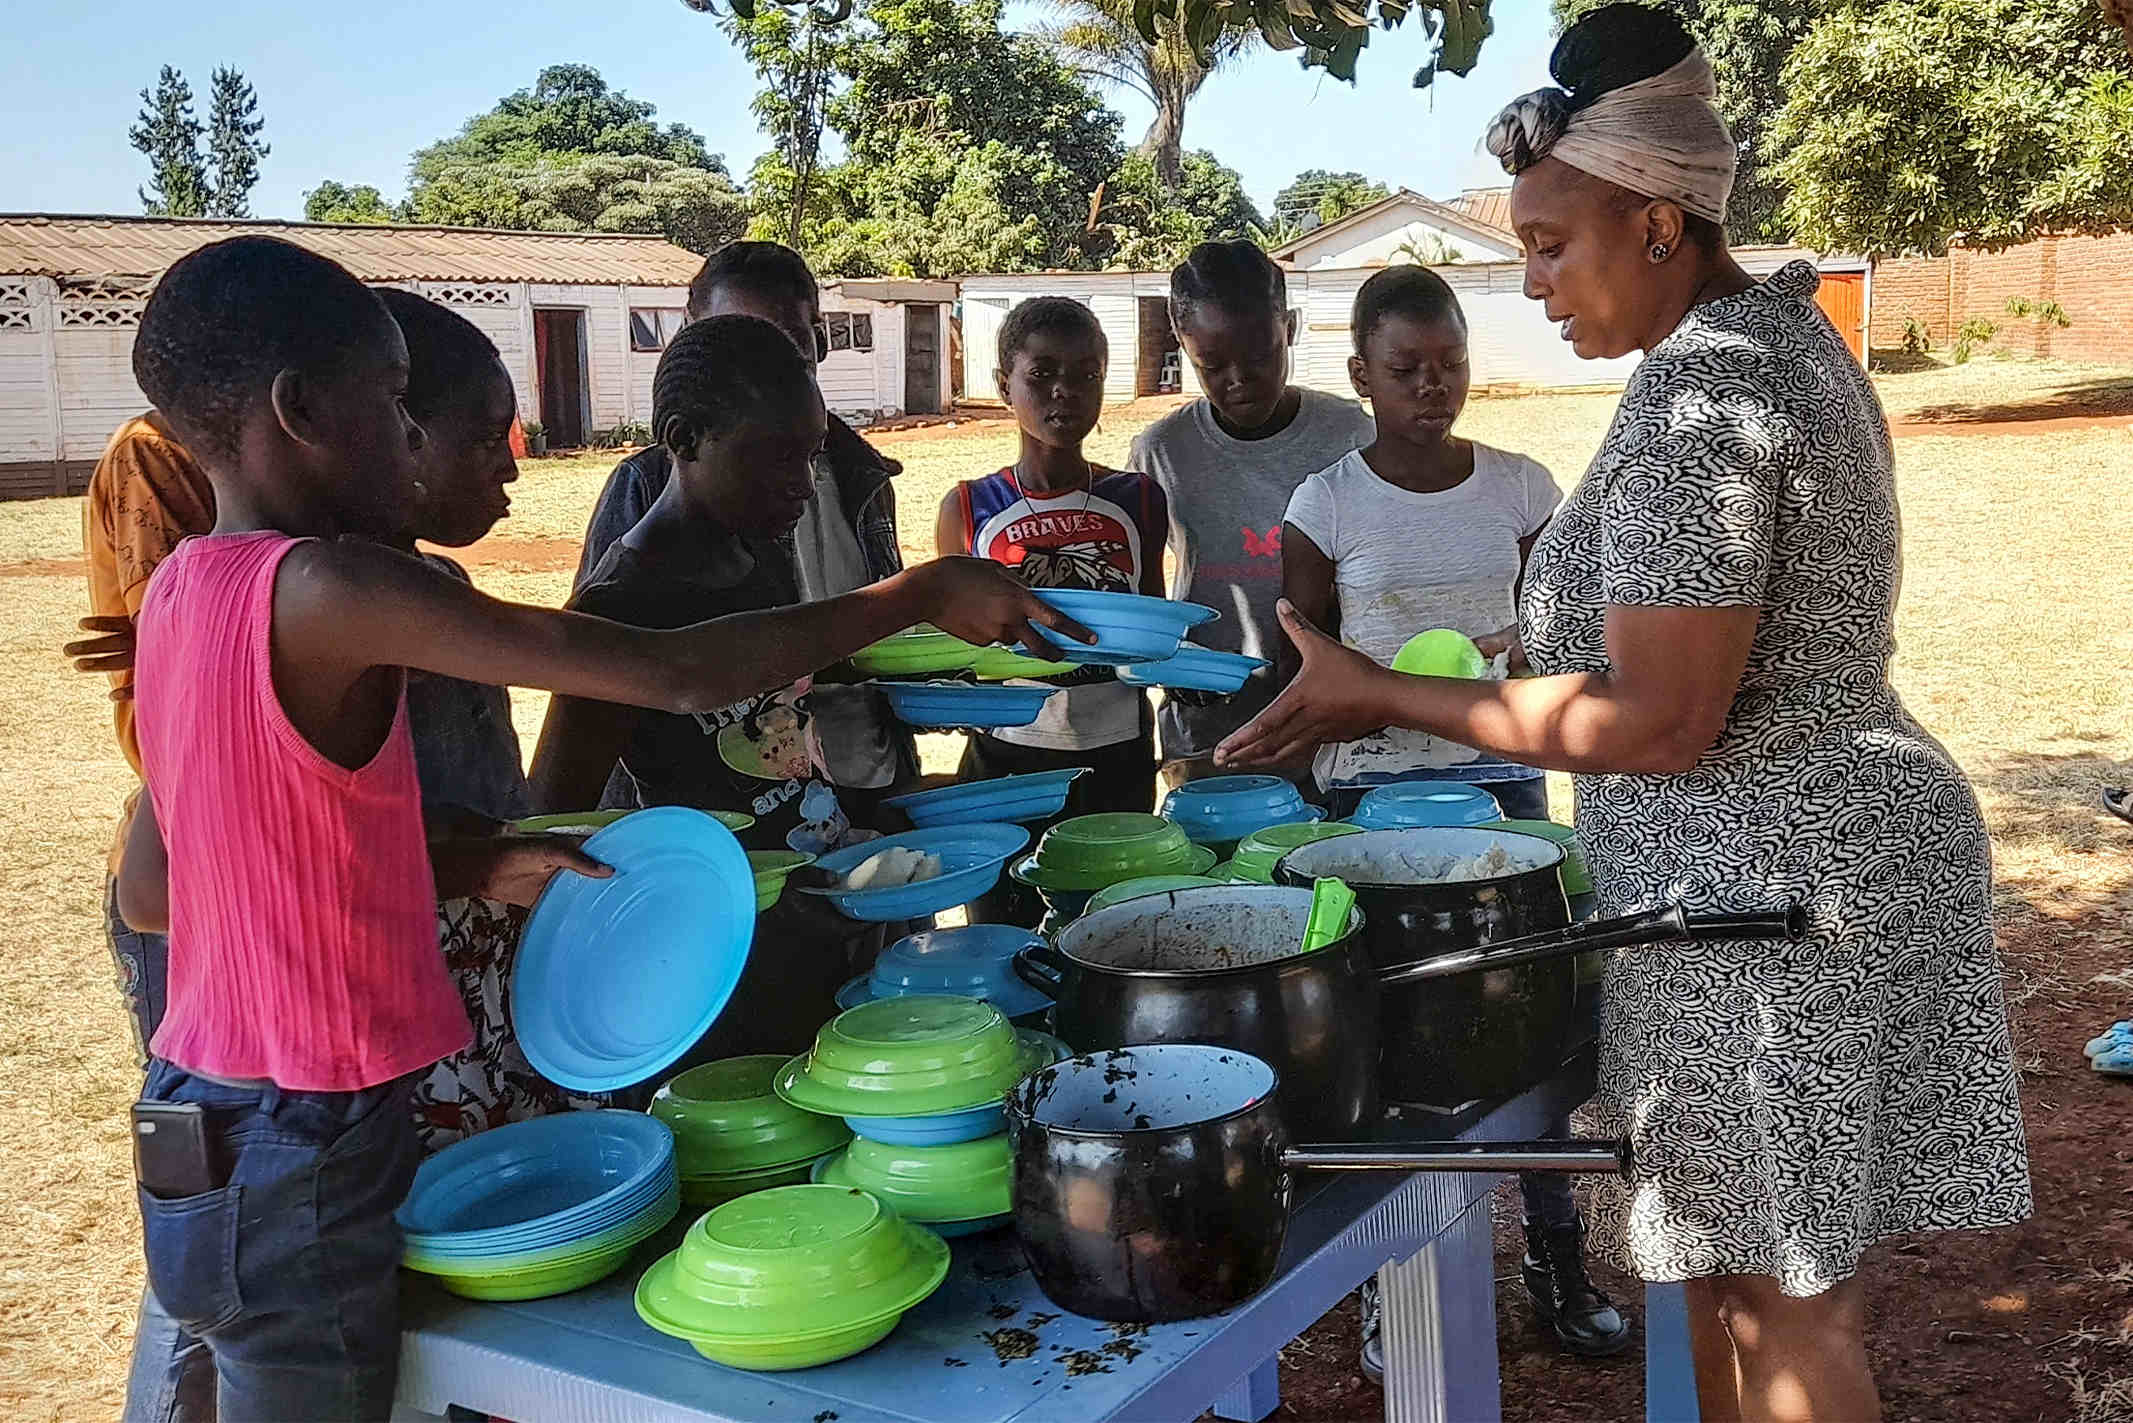 Christian woman in Zimbabwe feeding several children who are holding green and blue bowls